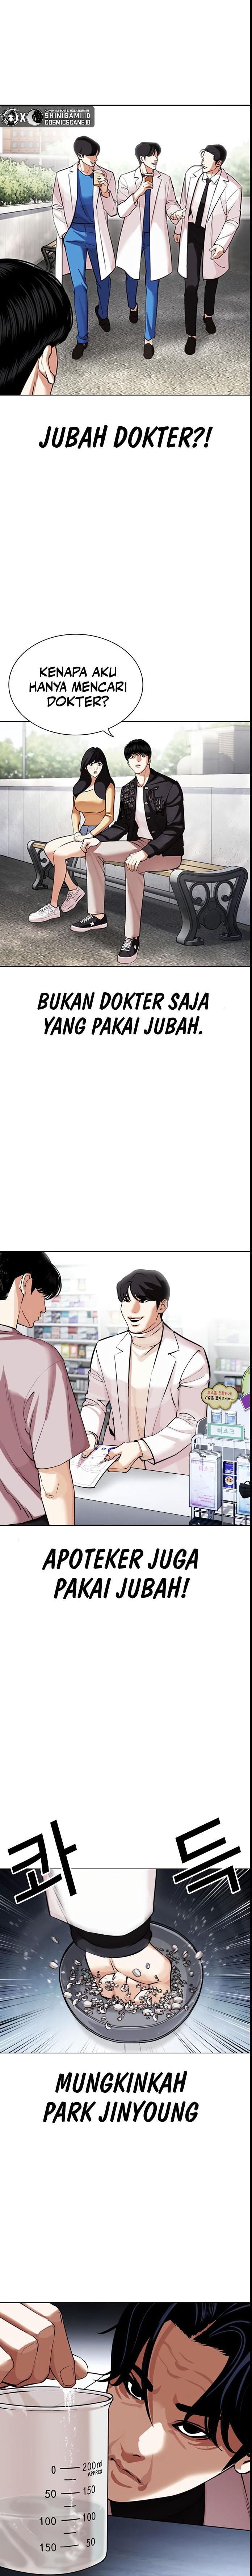 Lookism Chapter 445